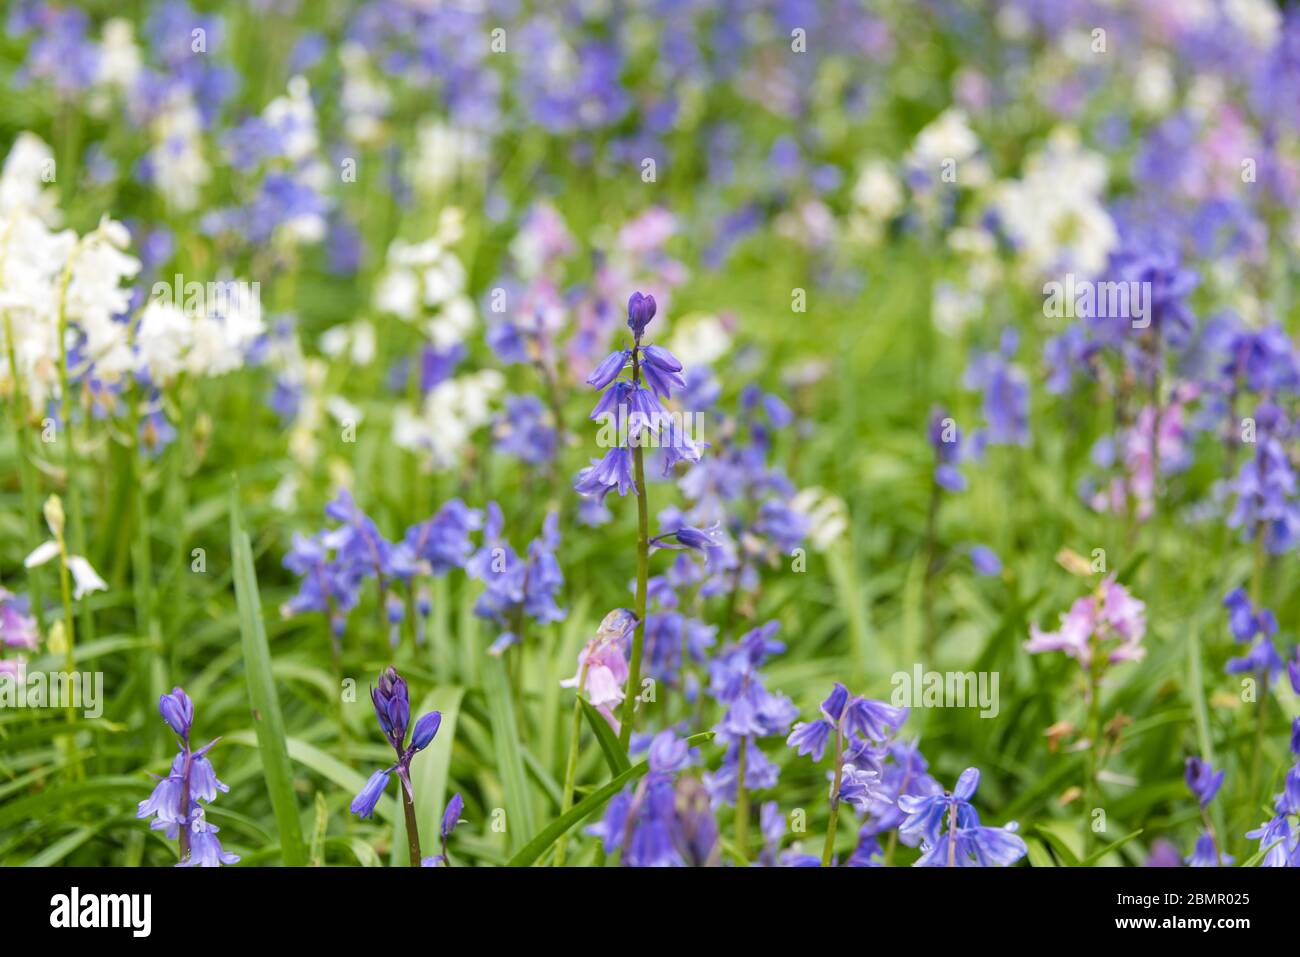 Bluebell flowers in the wild. Floral wildflowers background with bluebells and sweet peas Stock Photo